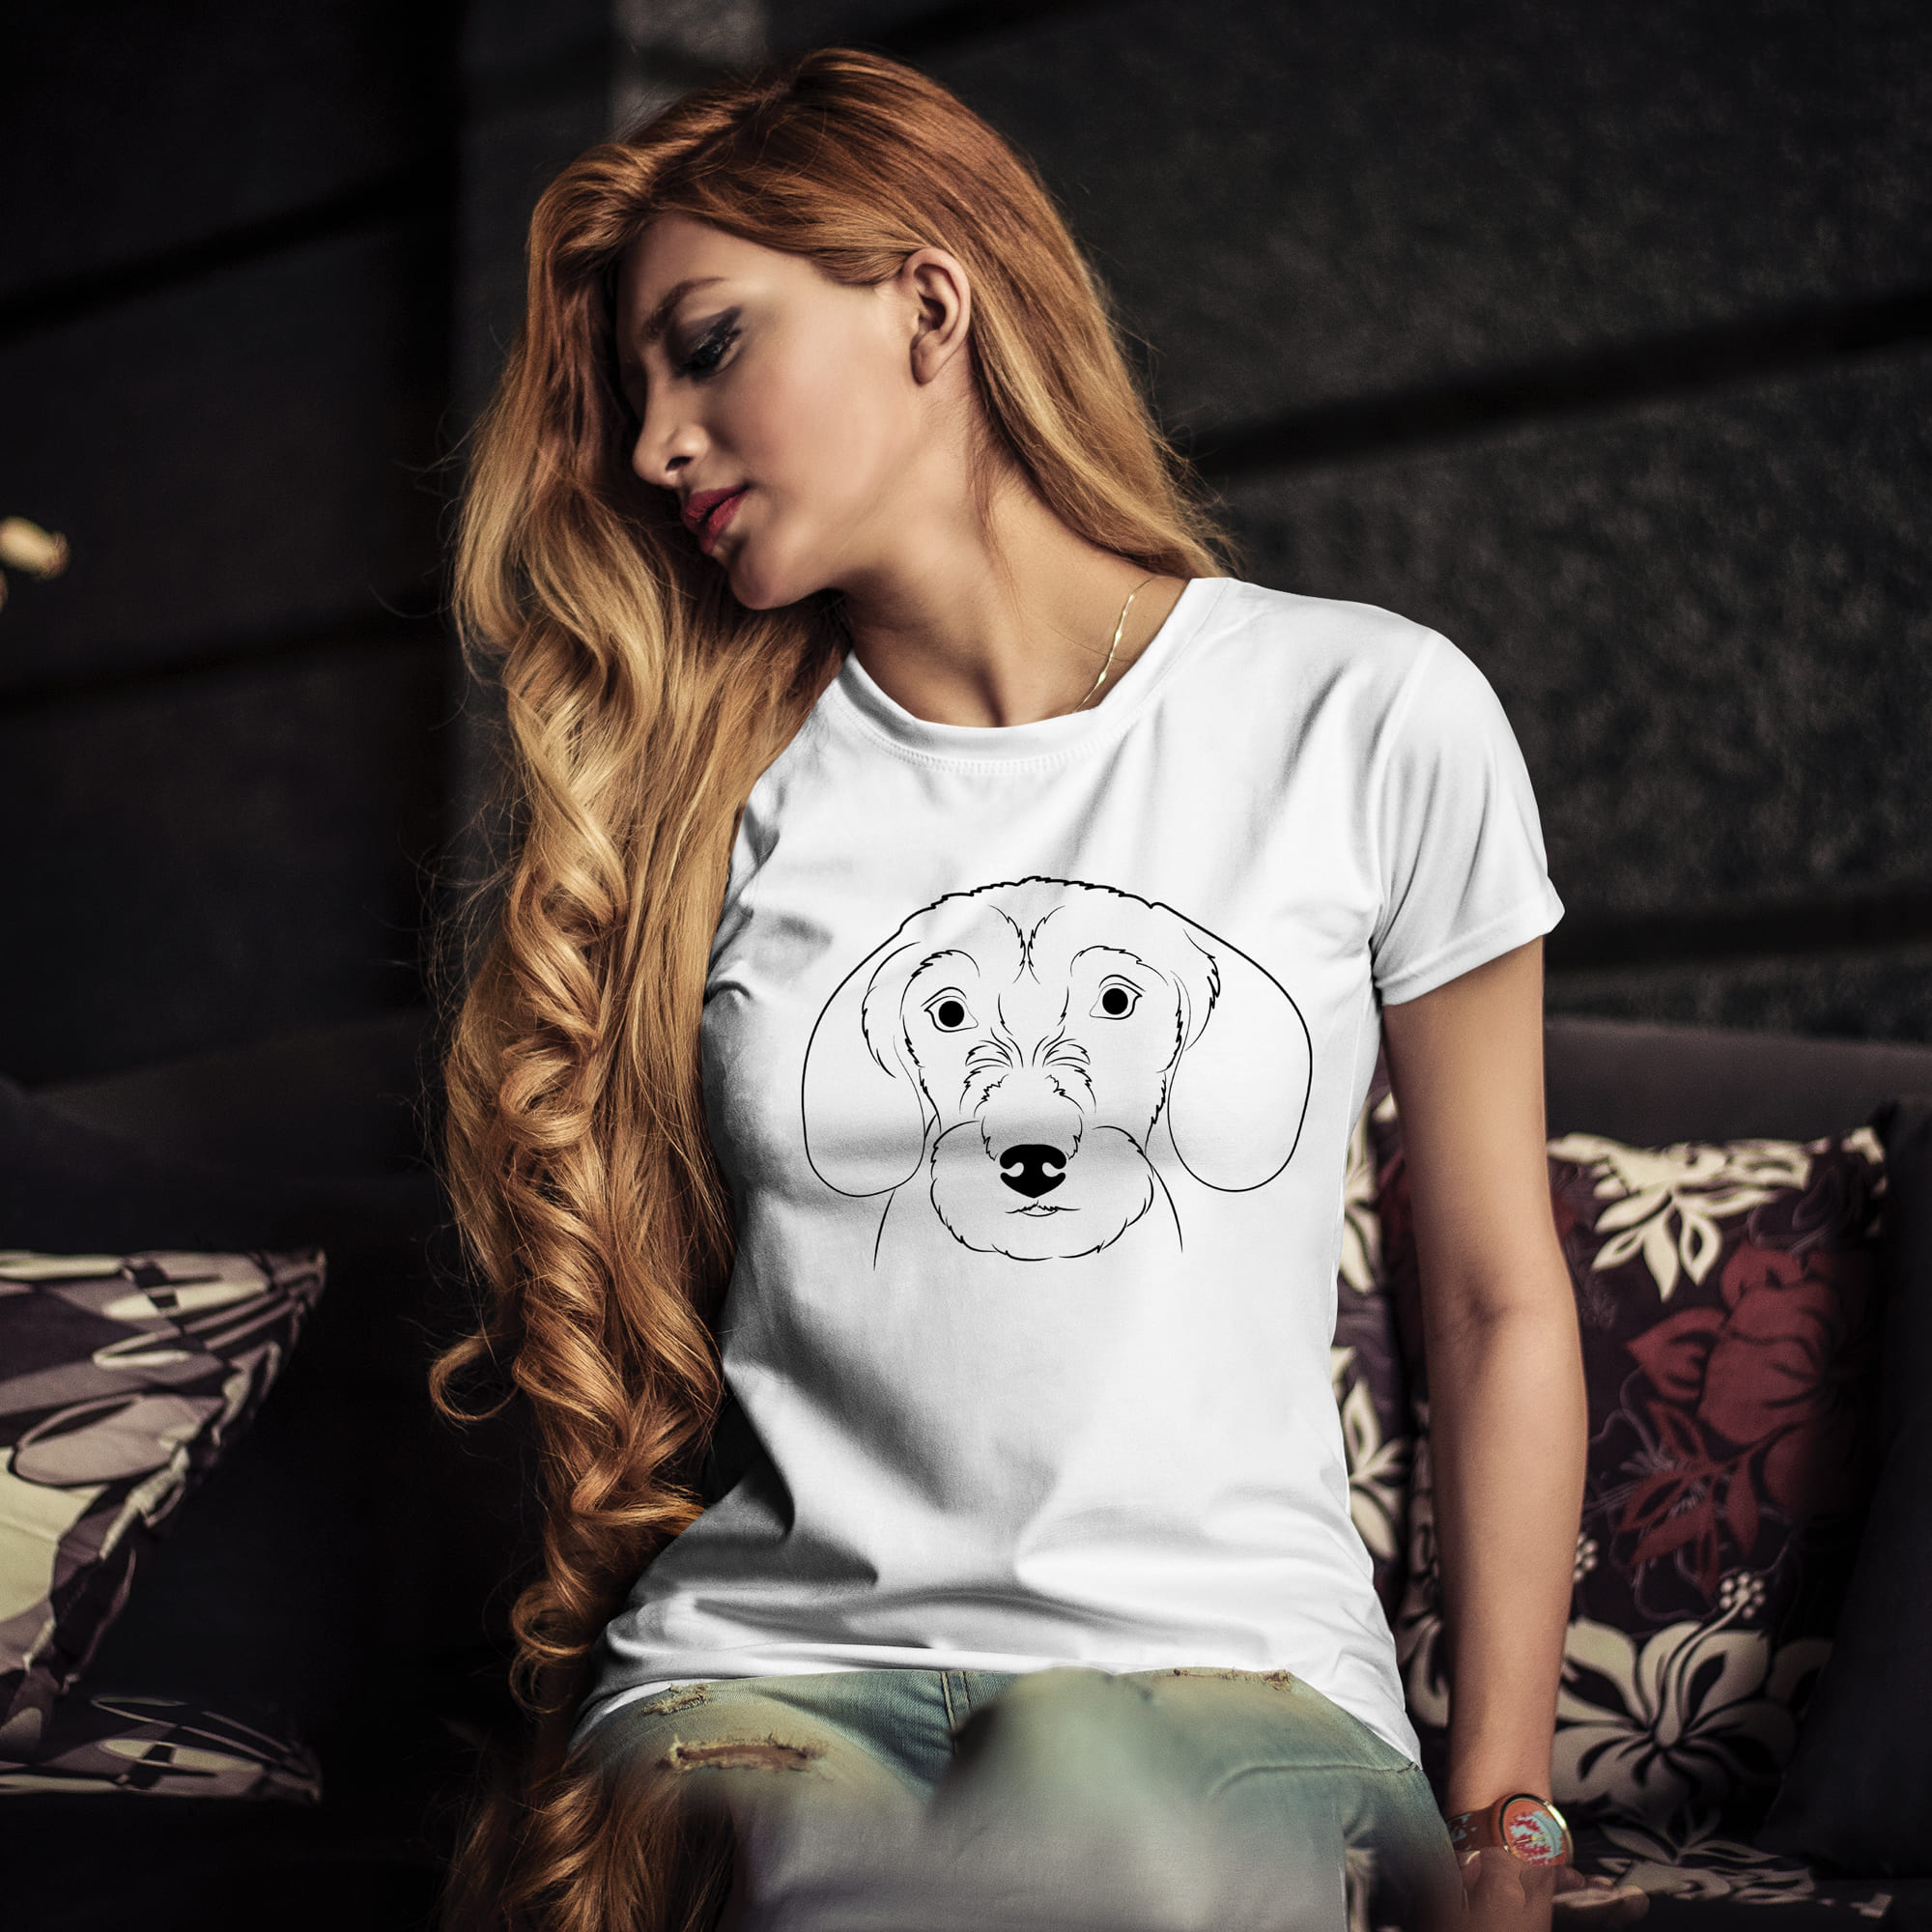 Woman sitting on a couch with a dog t - shirt on.